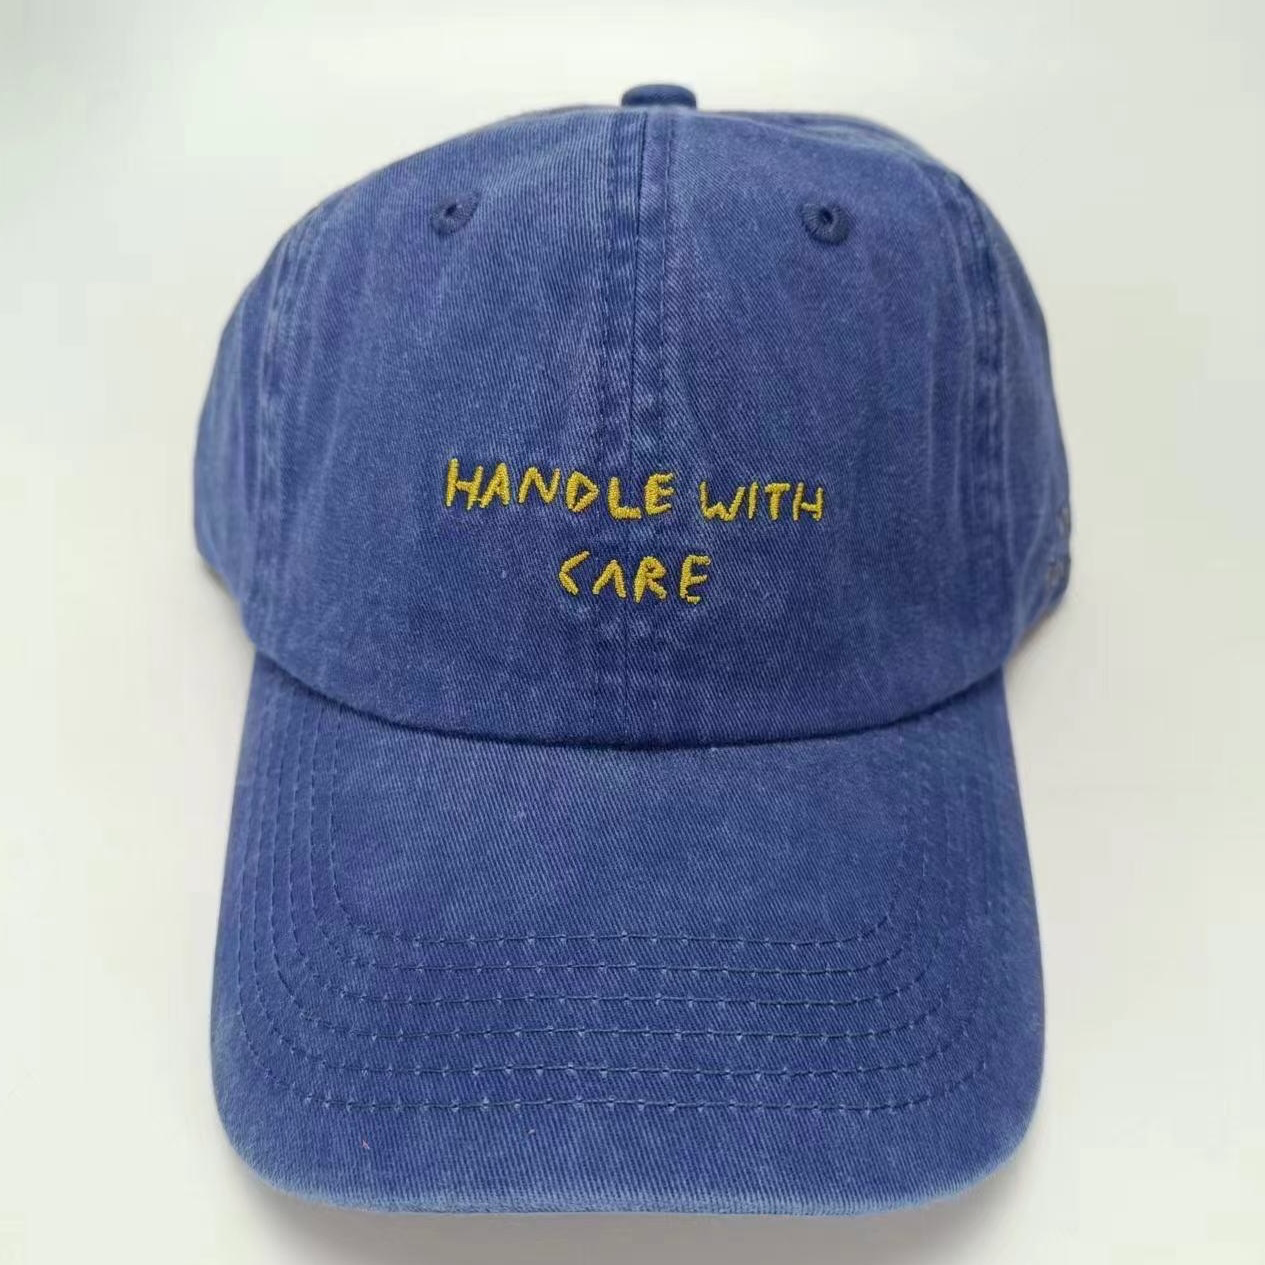 Handle with care hat